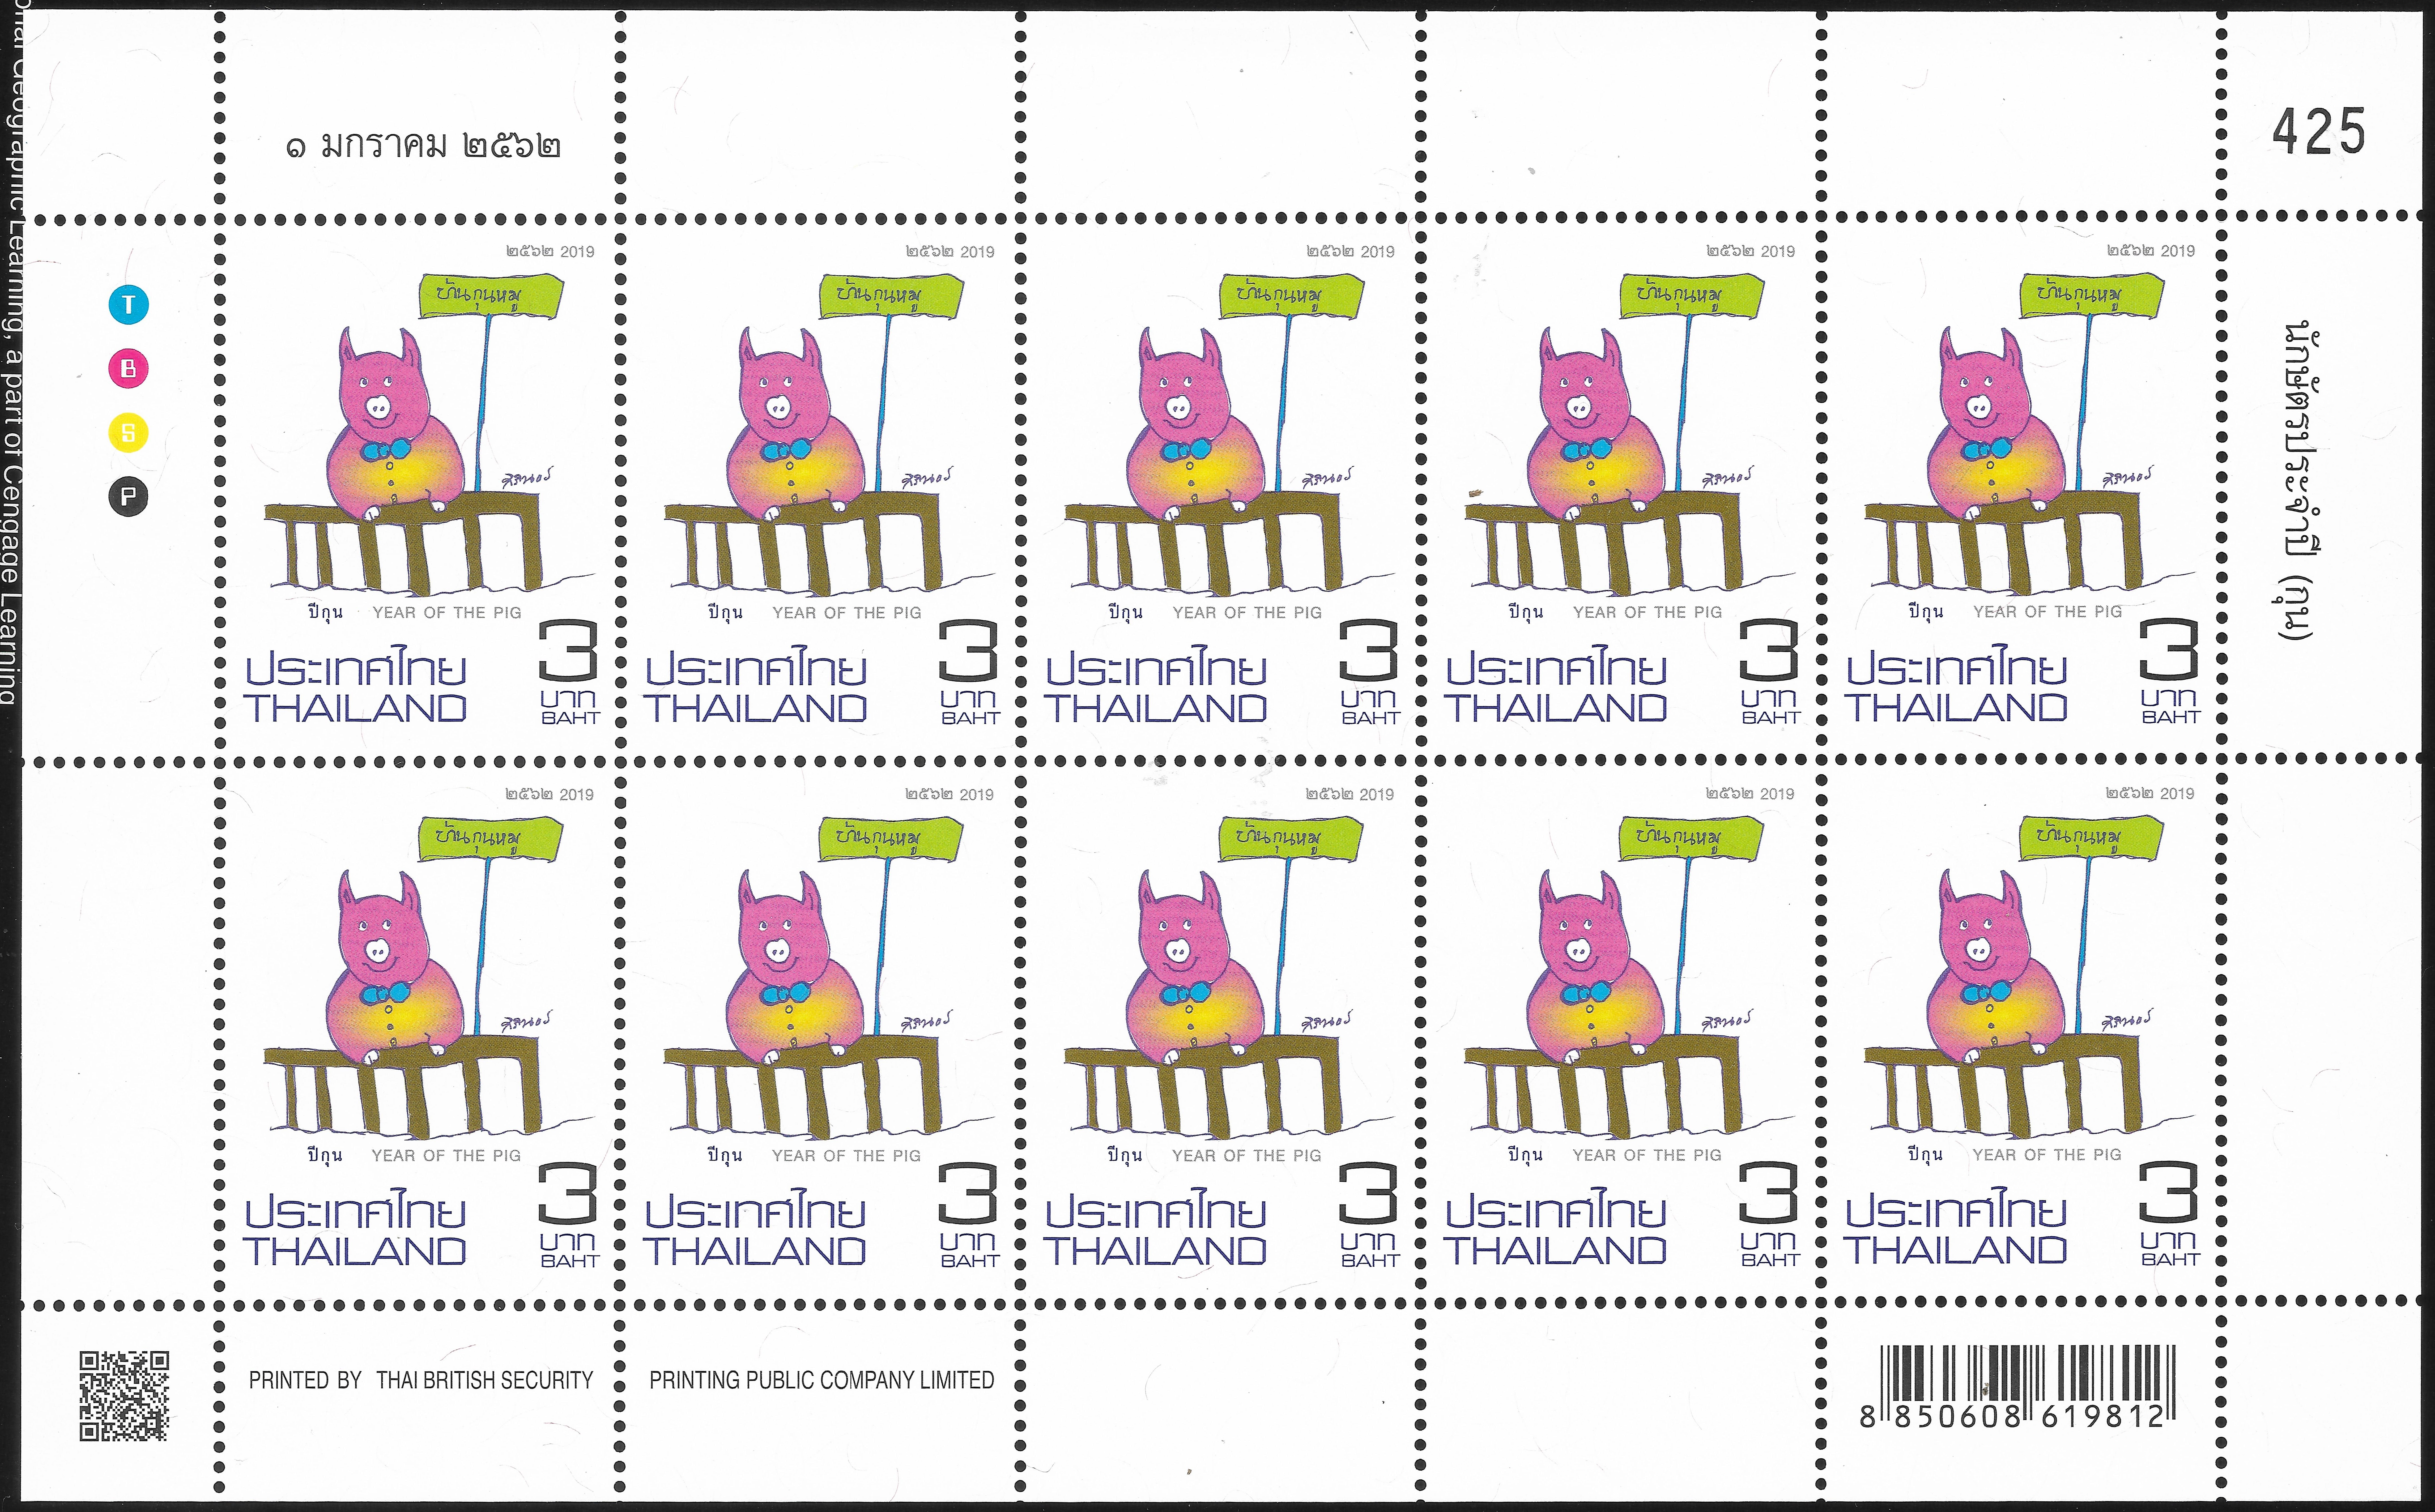 UPDATED: Thailand - Thailand Post #TH-1162 (2019) full sheet